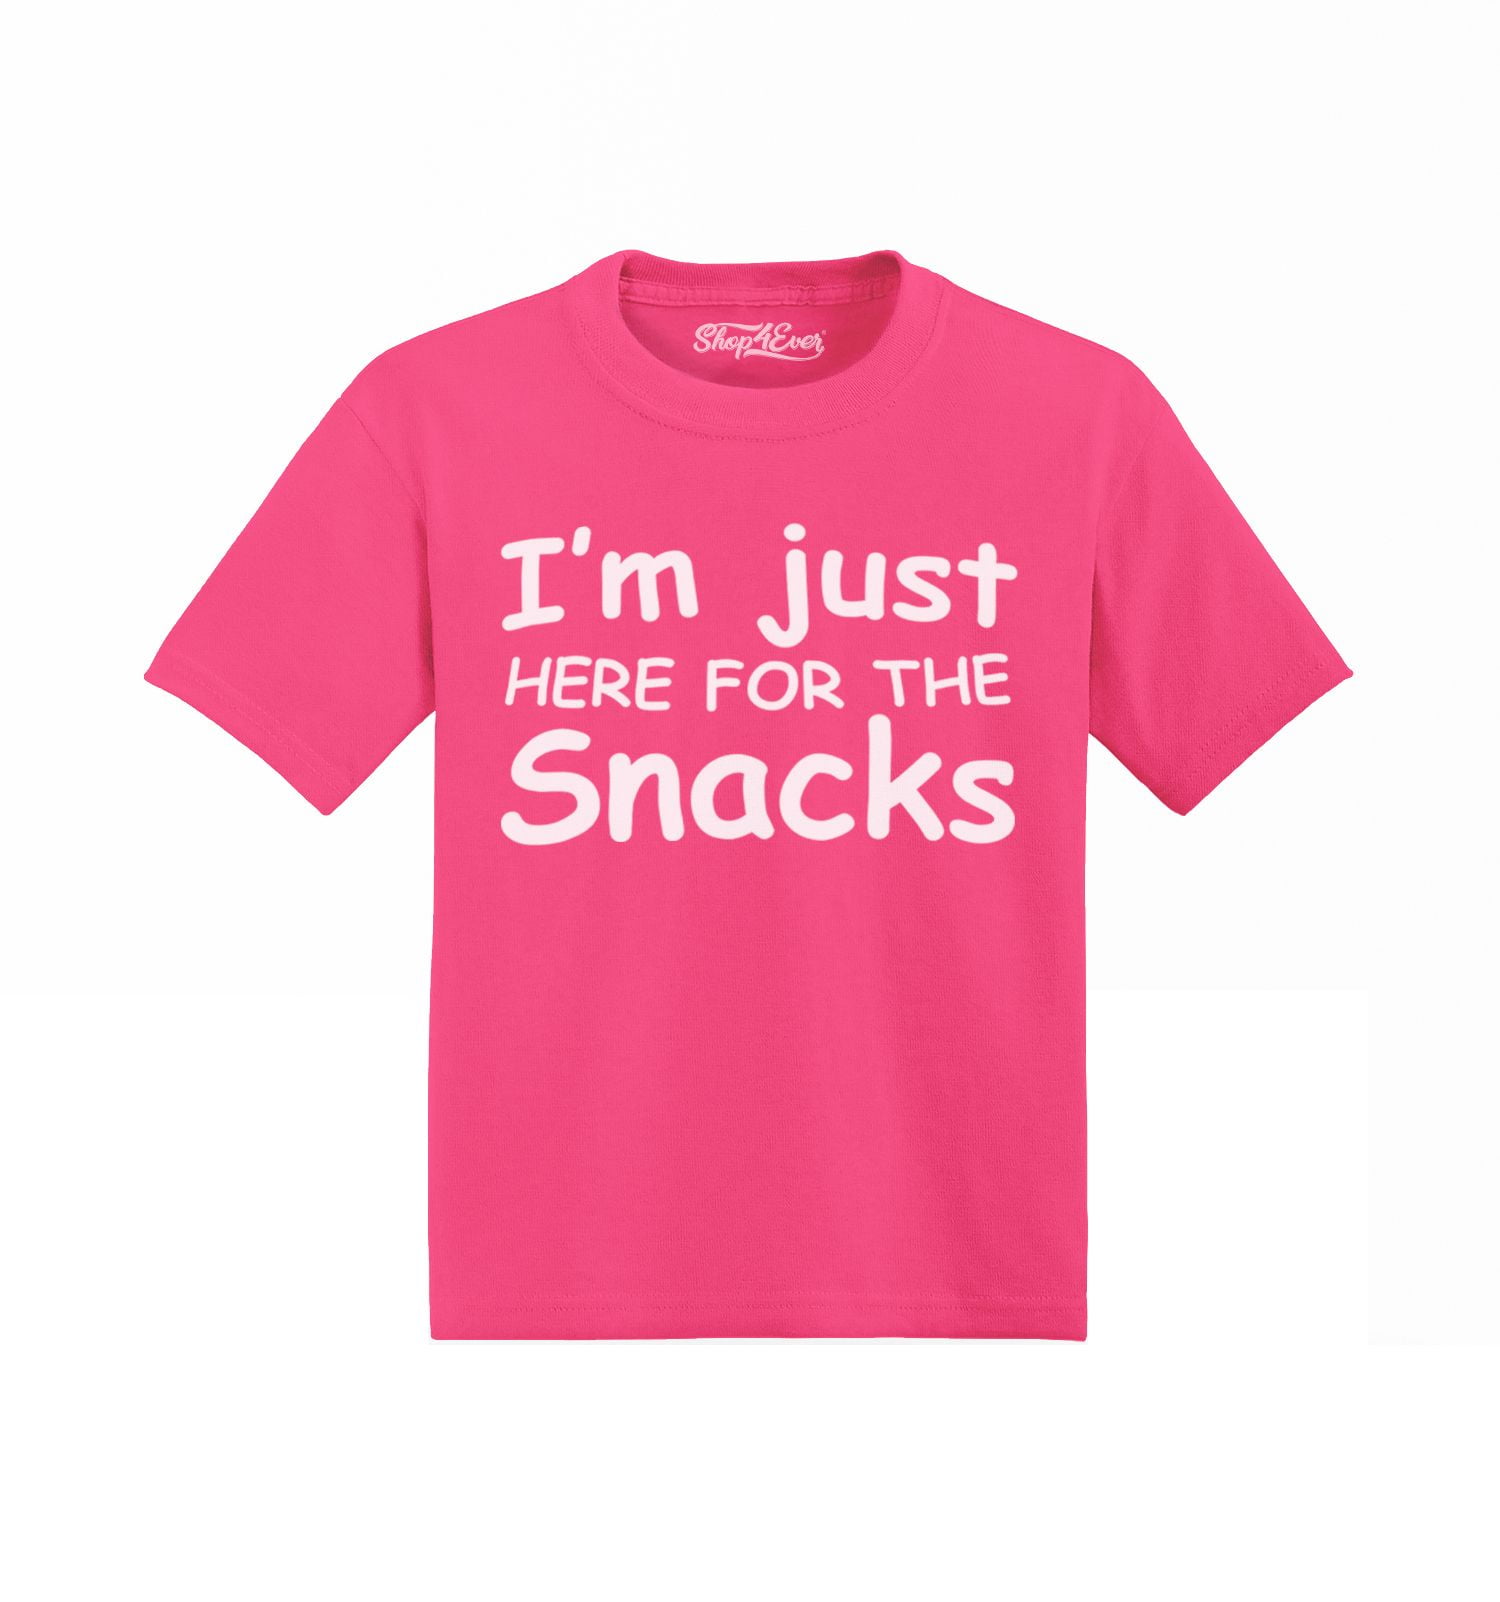 2T and 3T Toddler T Shirt Heather Gray 100% Cotton Funny Kids Tee Children's T-Shirt Shirts With Sayings Just Here For The Snacks